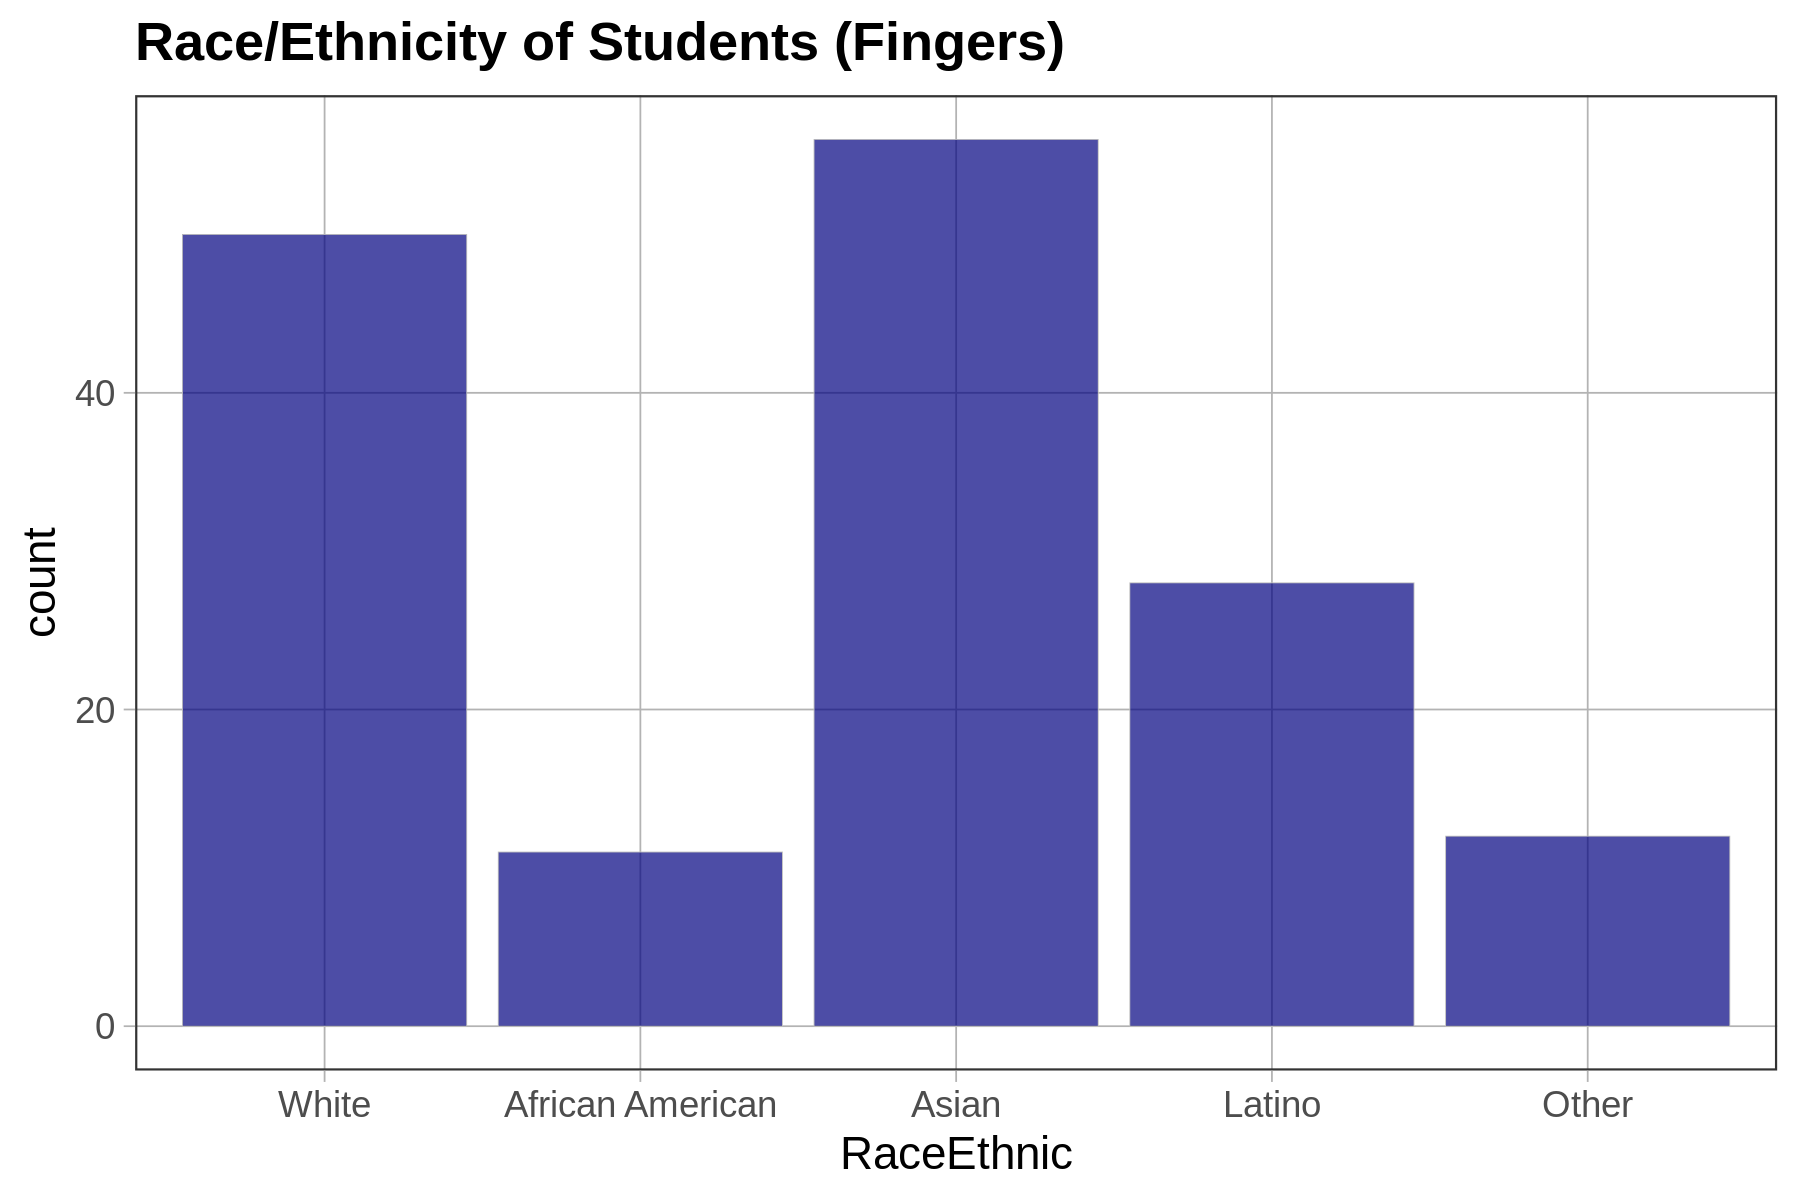 Bar graph of RaceEthnic in Fingers. White and Asian groups have the highest counts, the Latino group has about half the count of these two groups, and the African American and Other groups have the lowest counts.